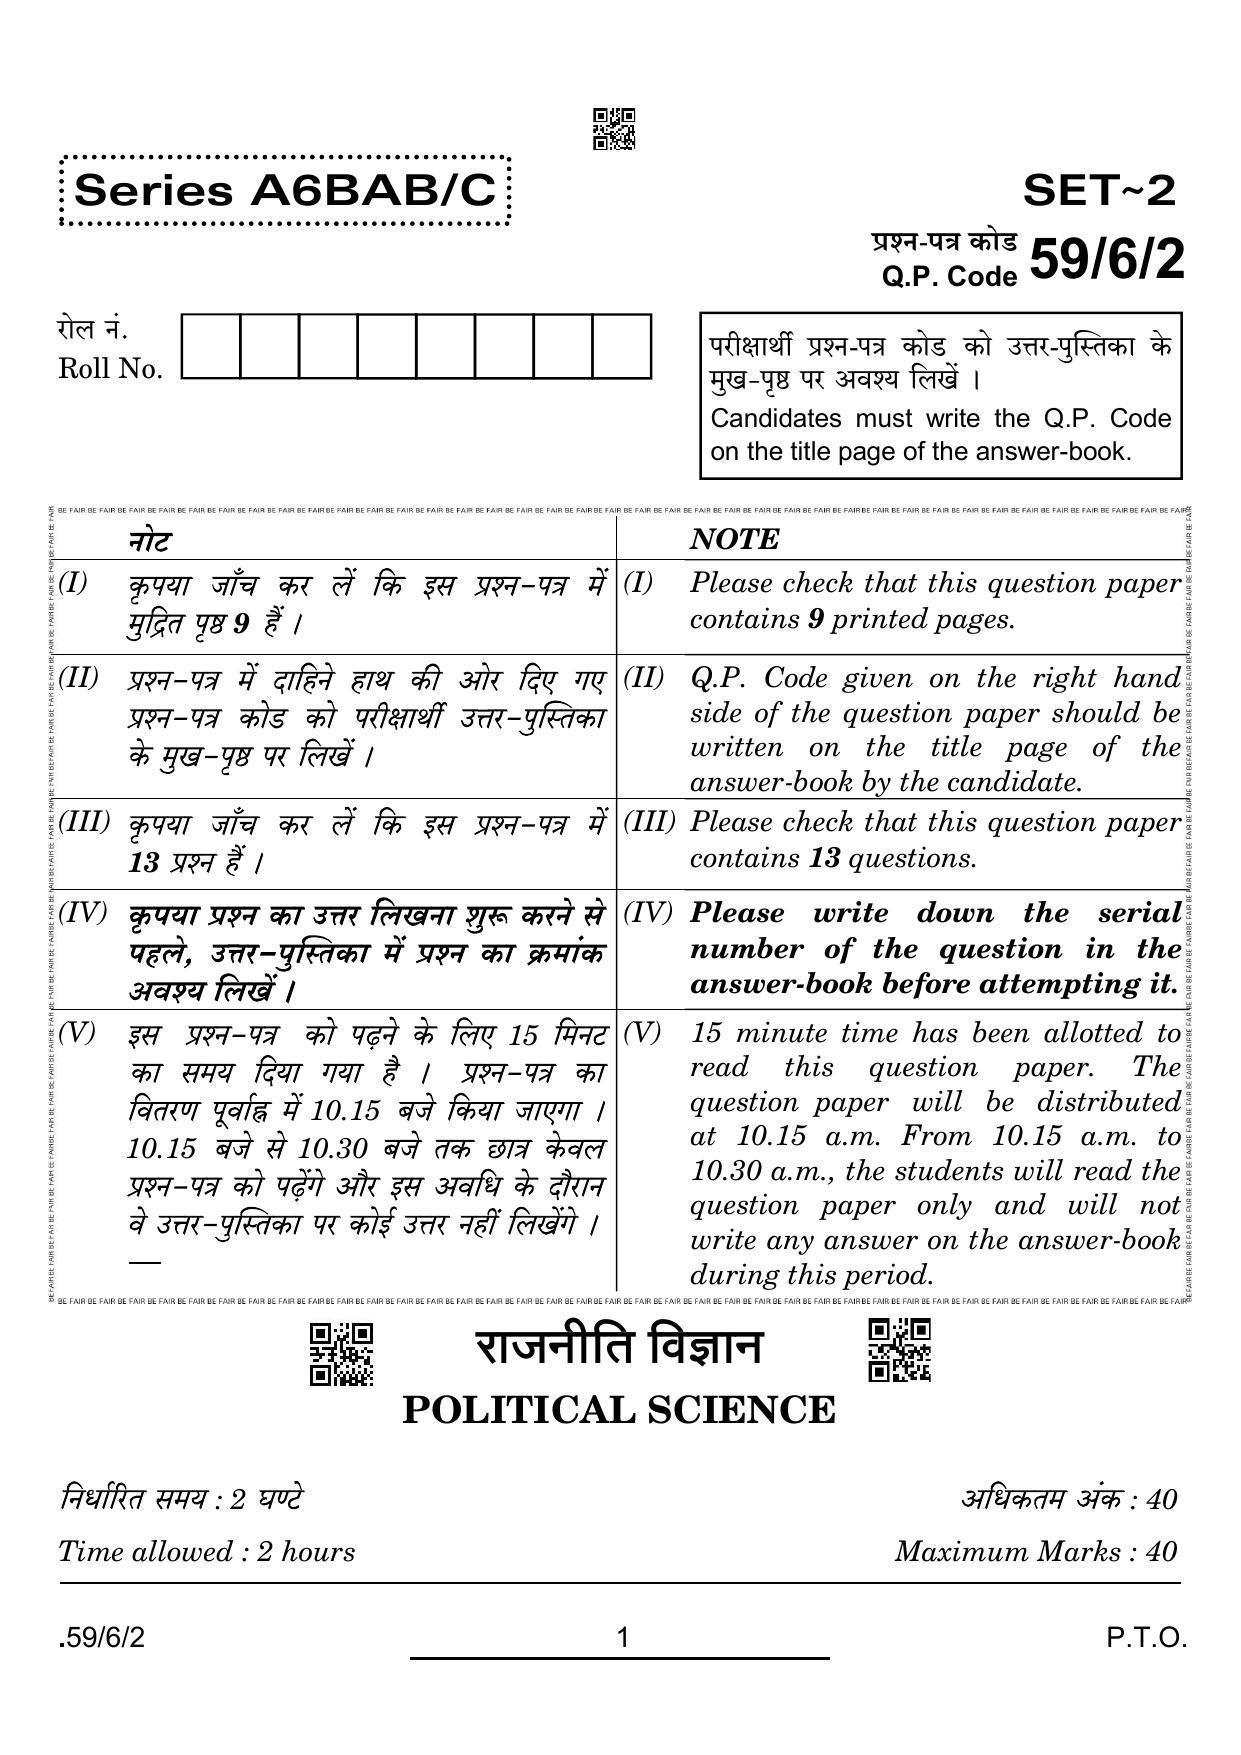 CBSE Class 12 59-6-2 POL SCIENCE 2022 Compartment Question Paper - Page 1